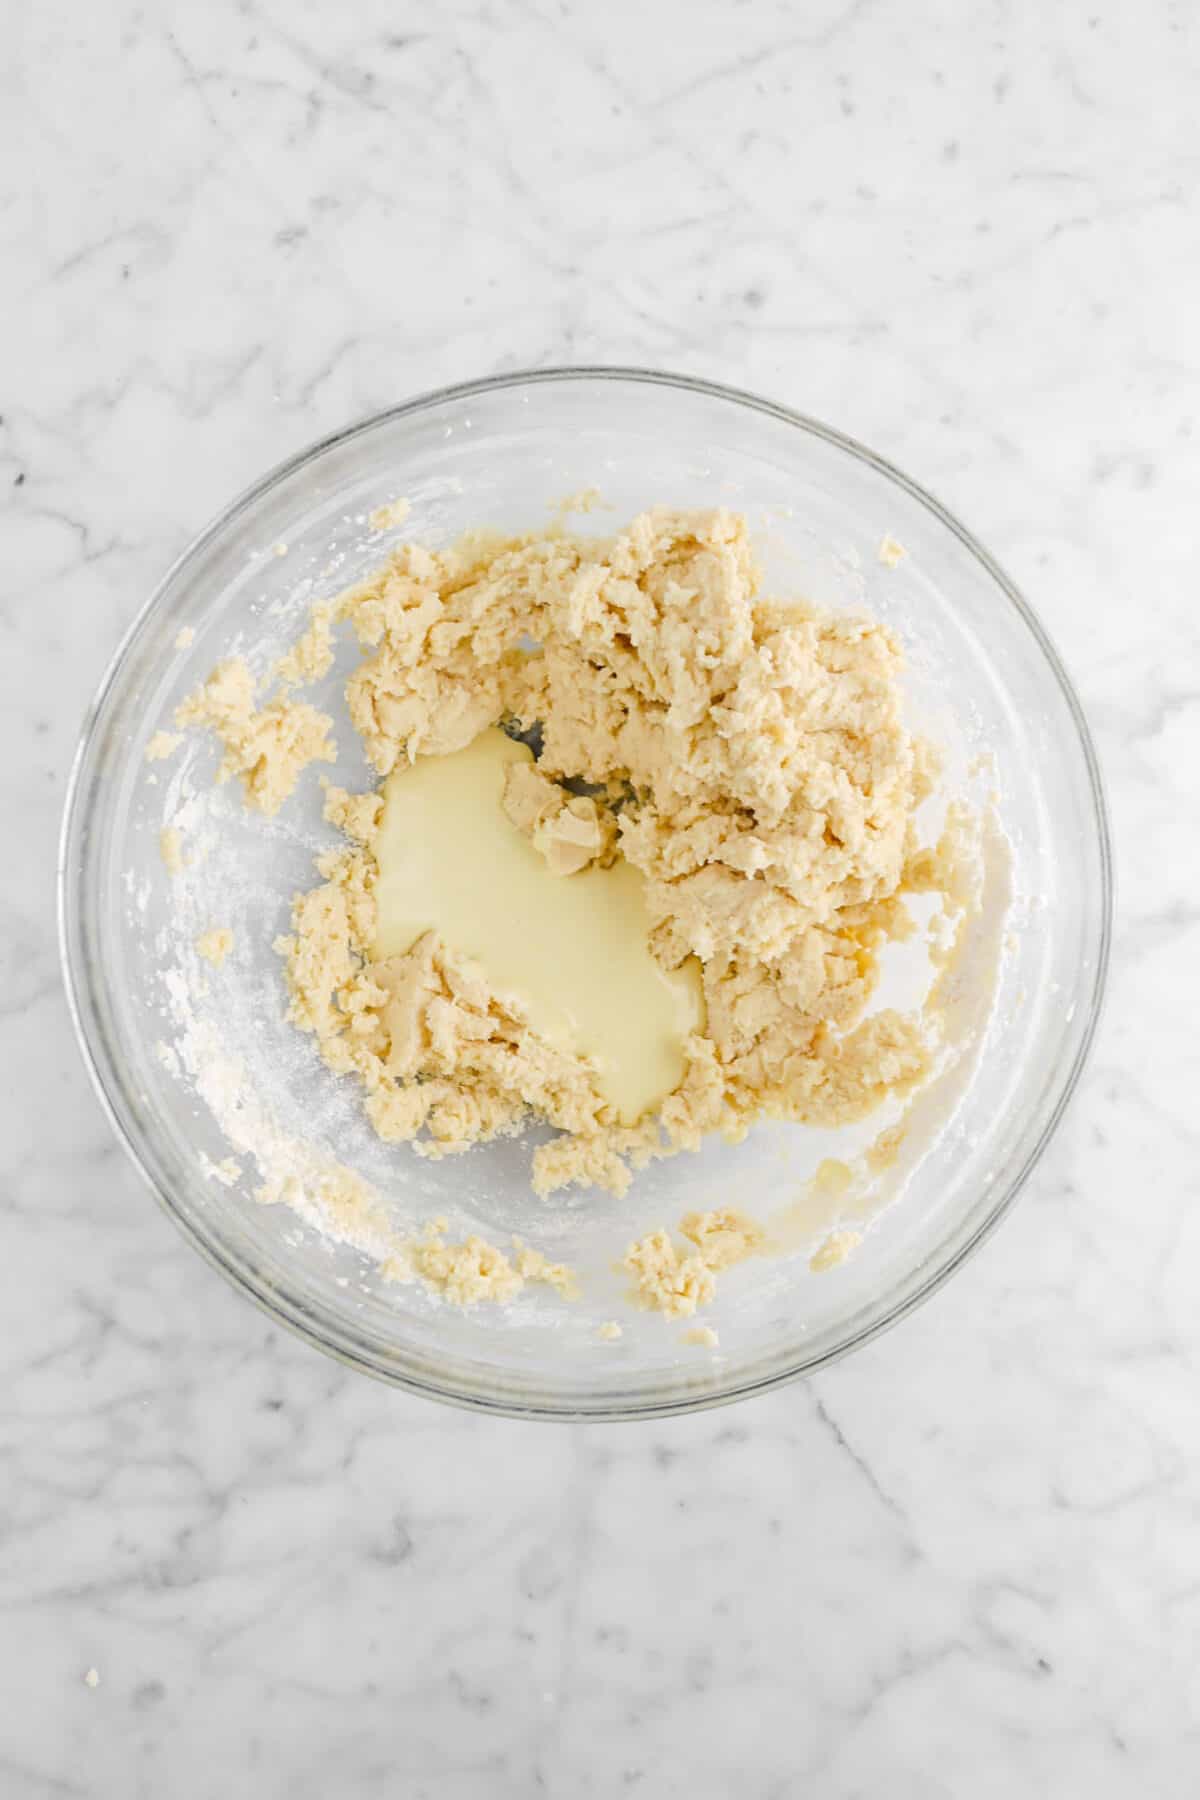 melted white chocolate added to cookie dough